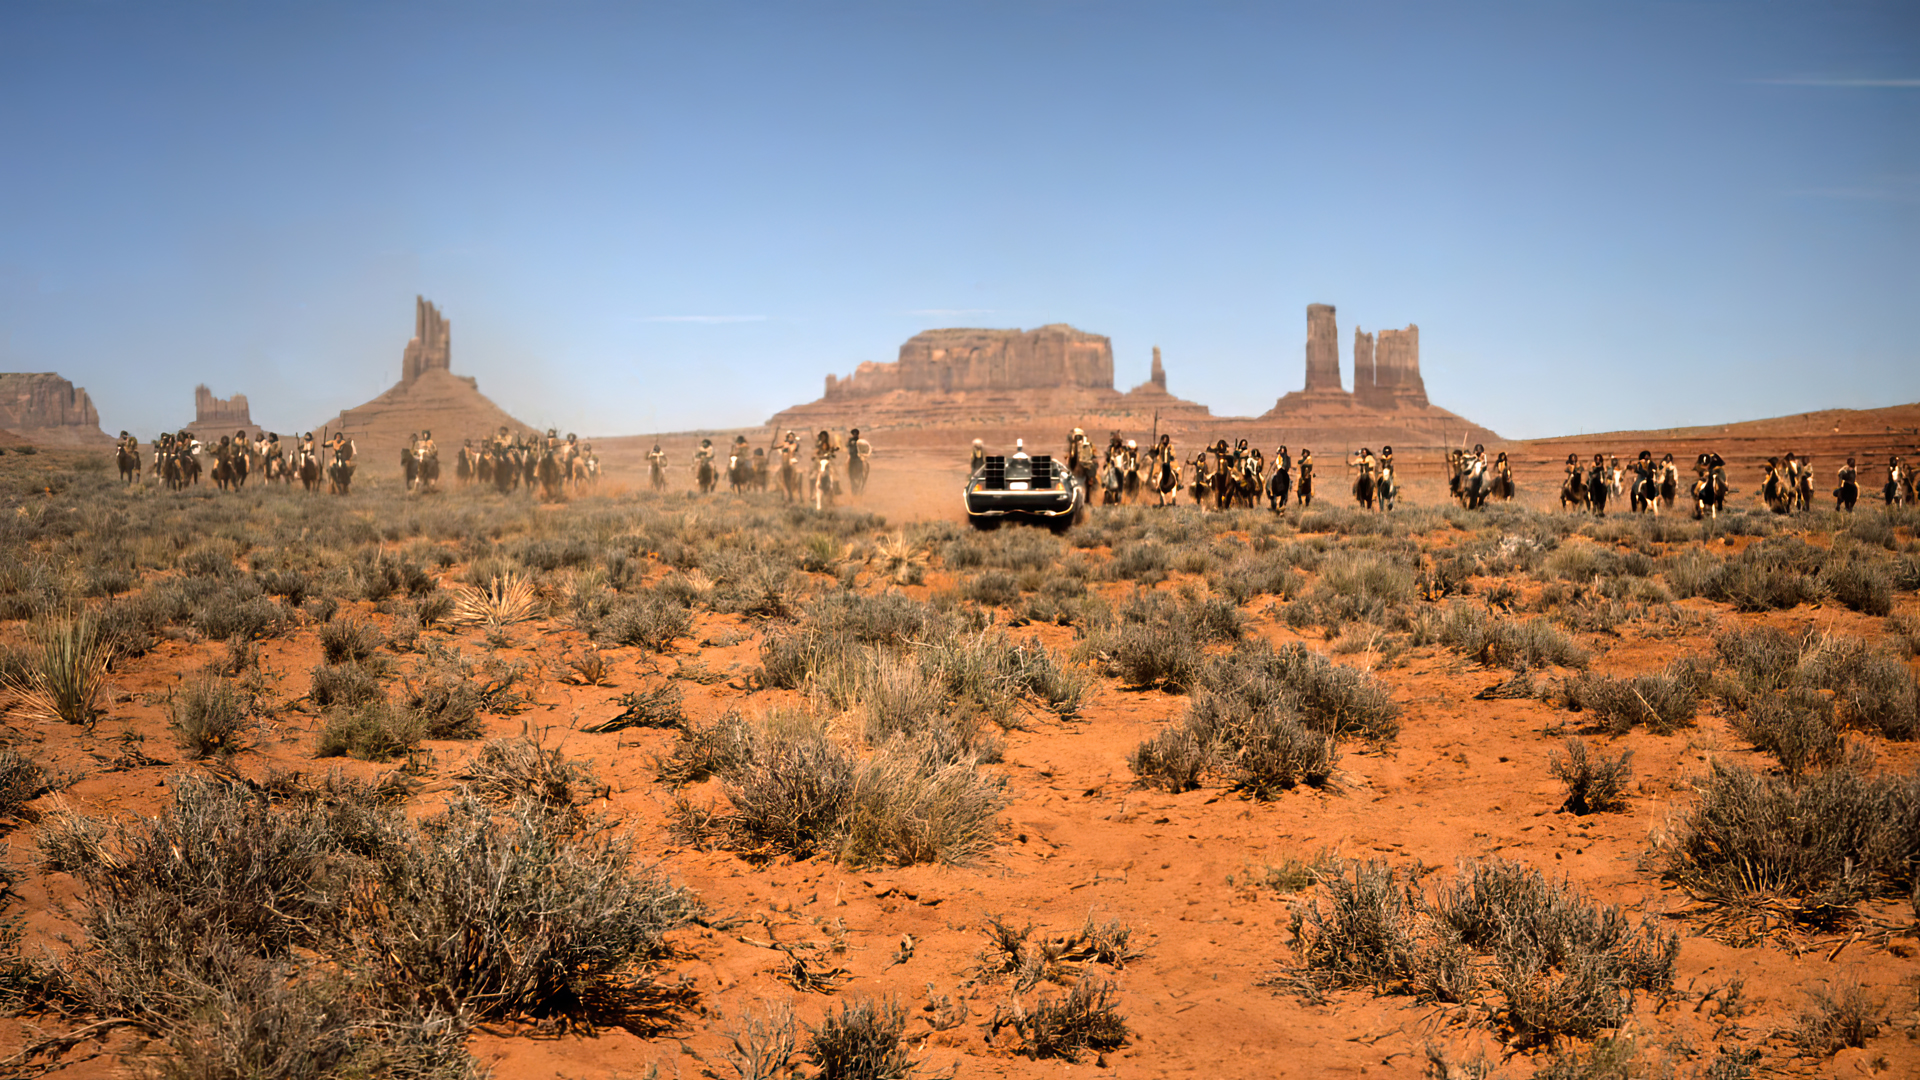 General 1920x1080 Back to the Future III (Movie) movies film stills Robert Zemeckis desert DeLorean plants sky Native Americans Monument Valley